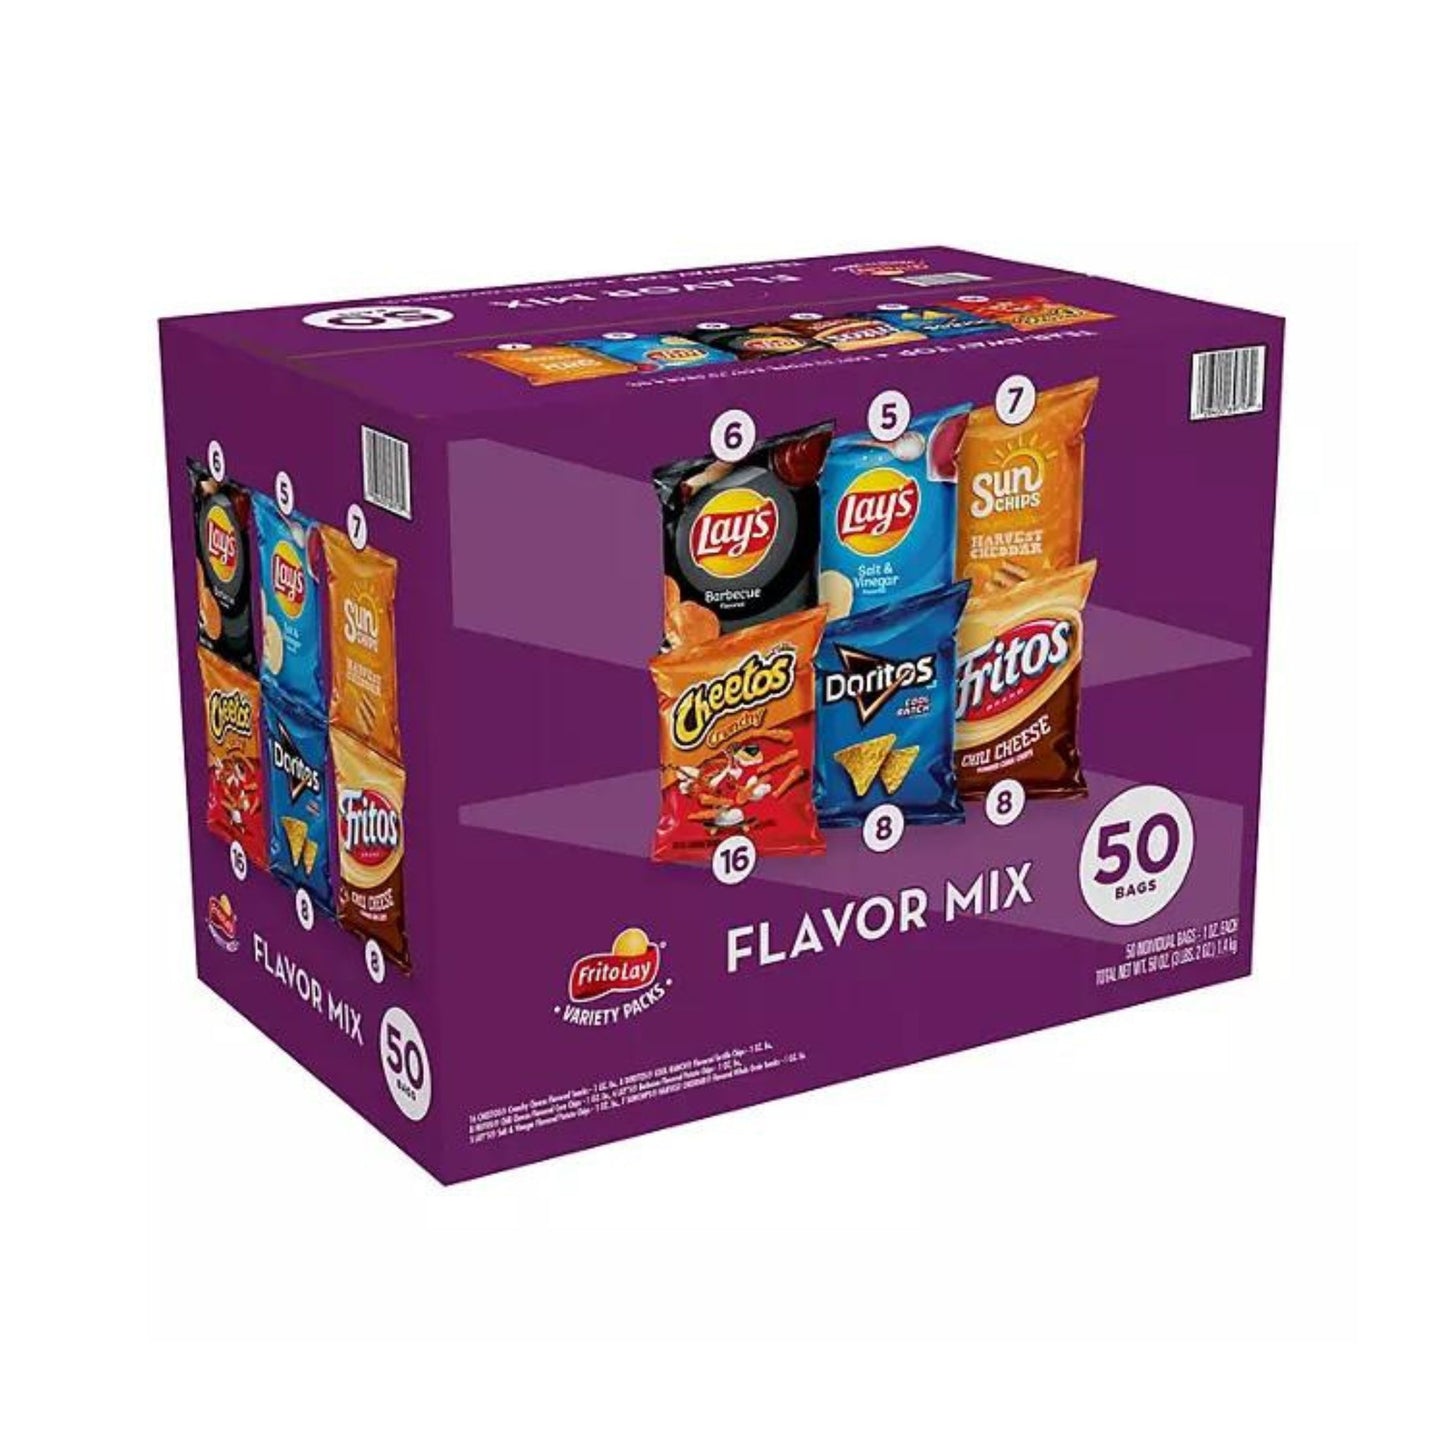 Frito-Lay Flavor Mix Chips Variety Pack 50bags per Pack